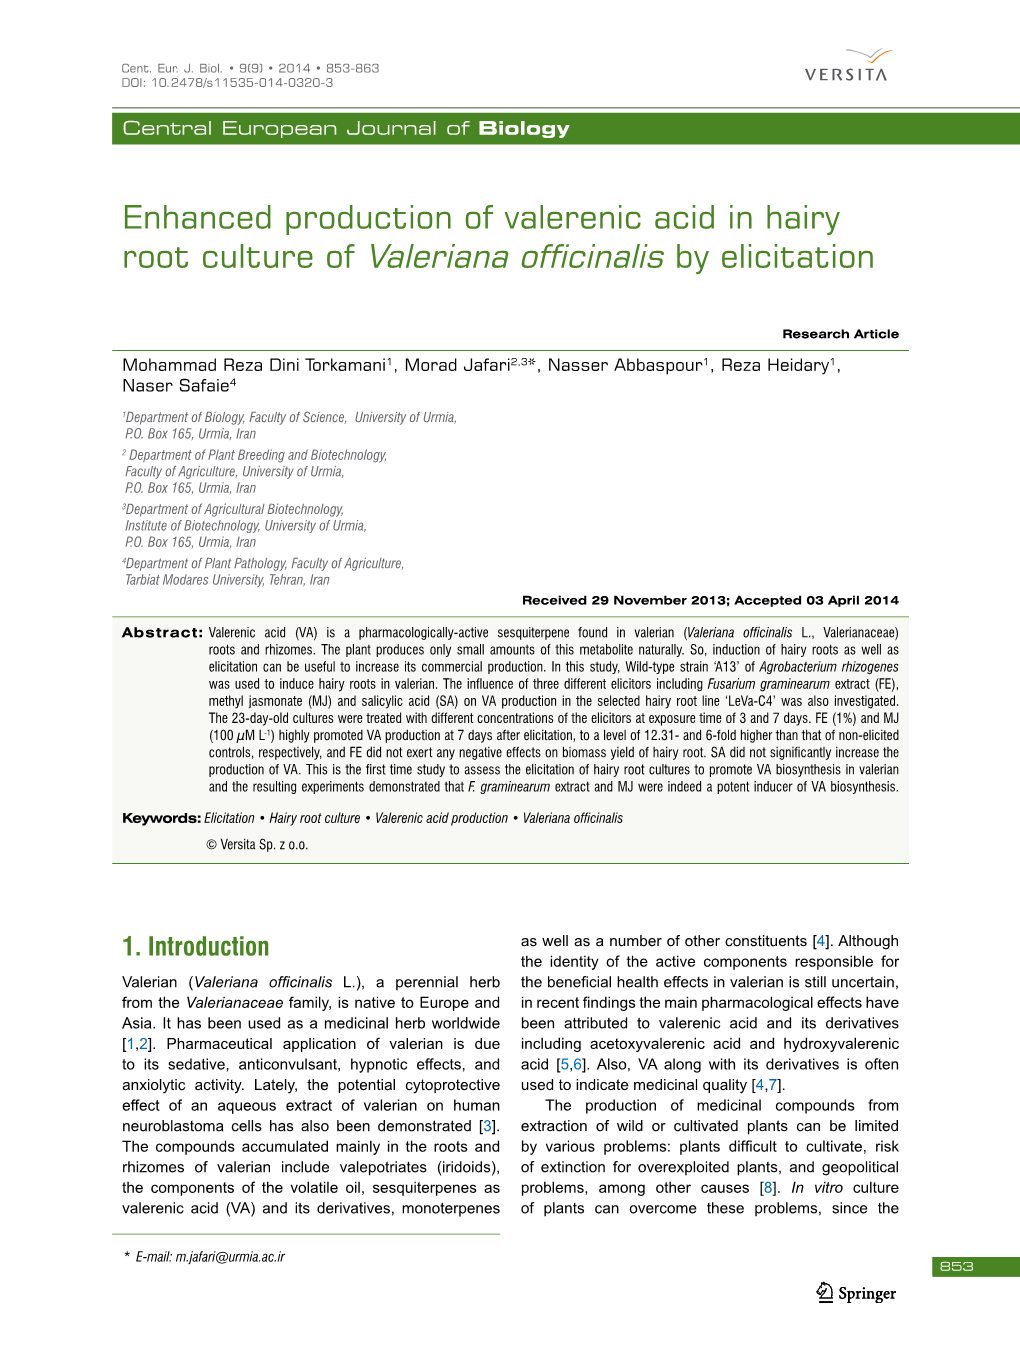 Root Culture of Valeriana Officinalis by Elicitation